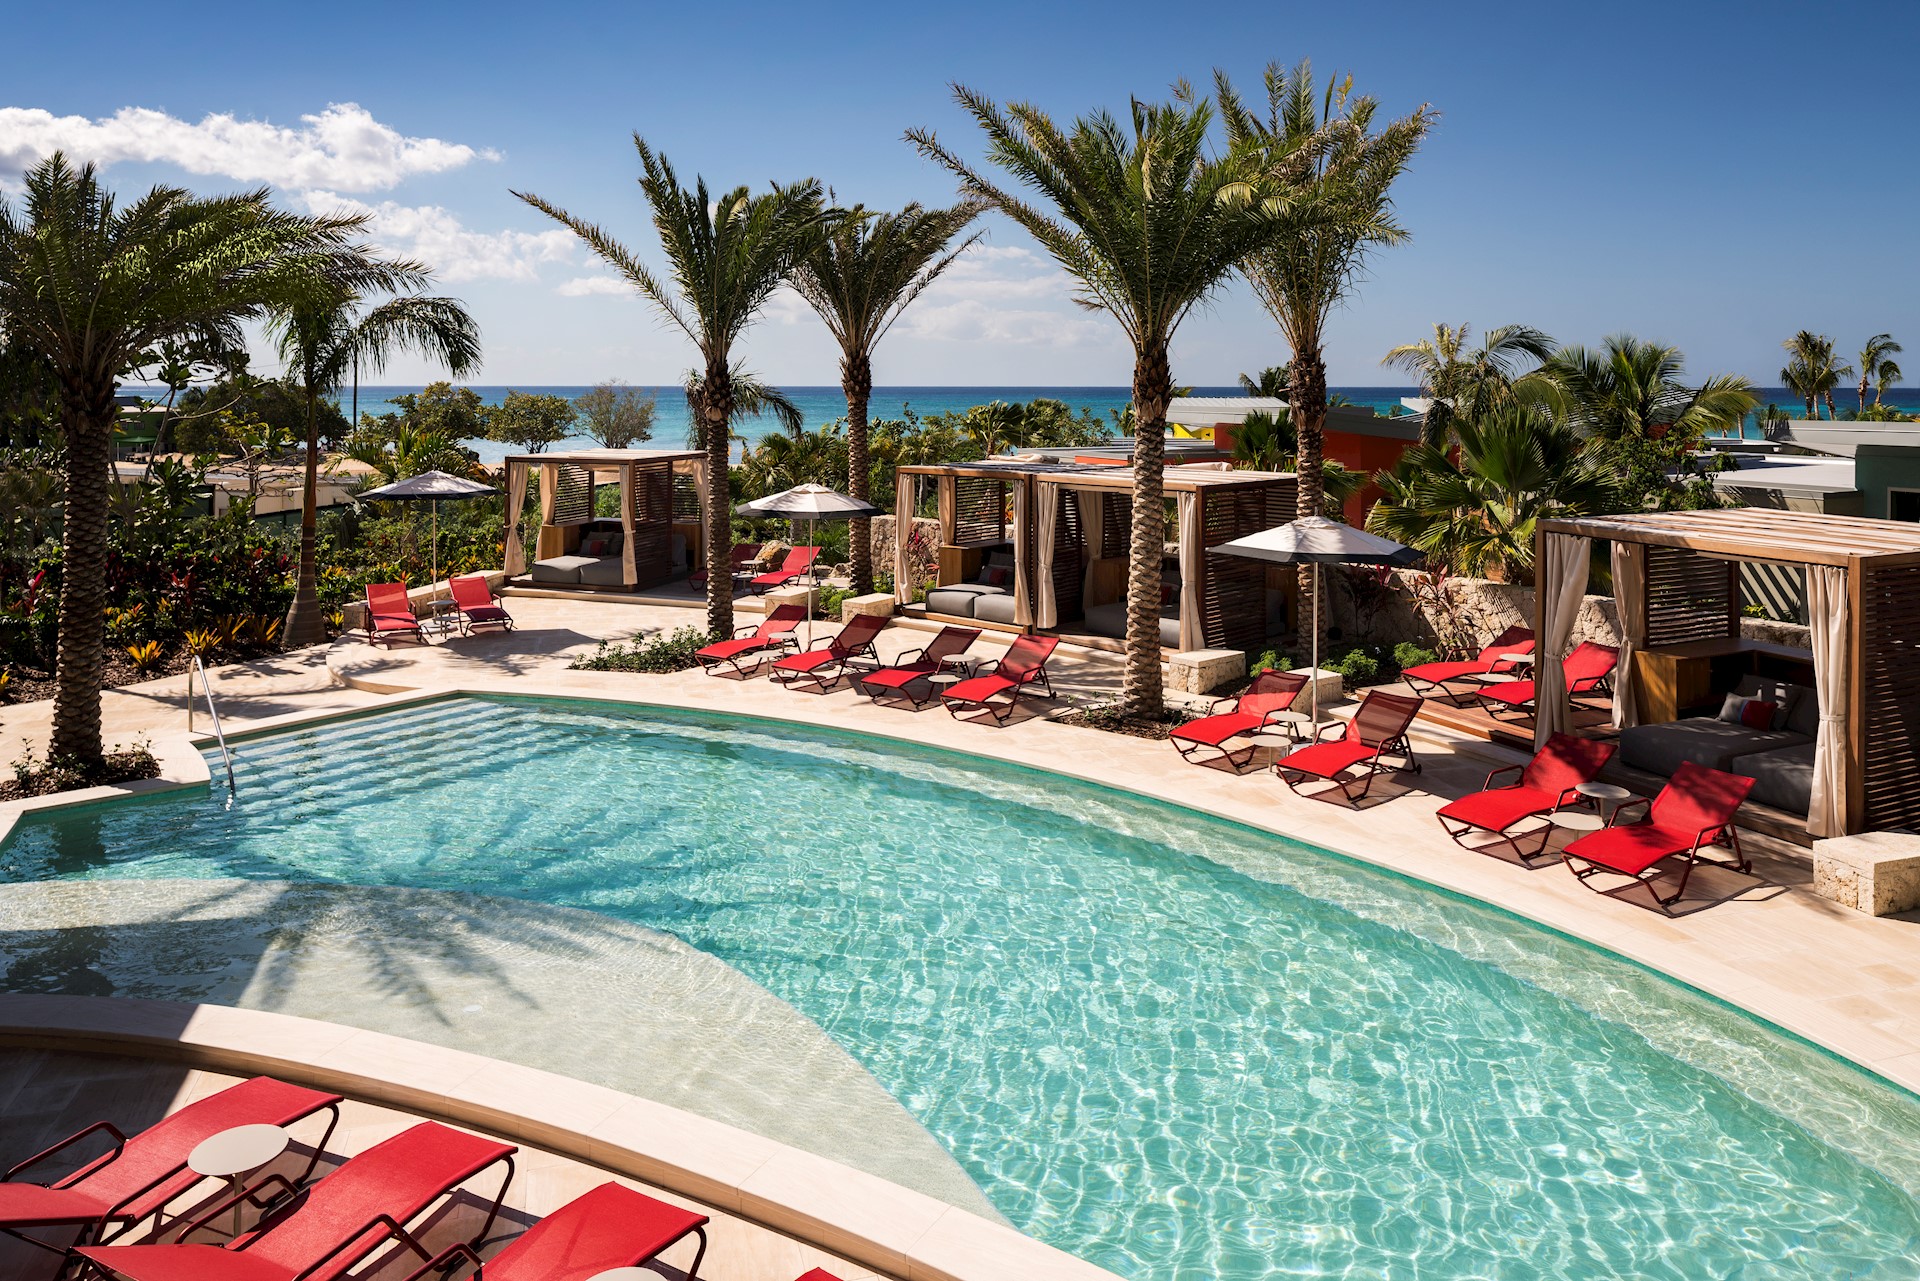 Forbes: Explore The Caribbean’s Newest Luxury Property – Grand Cayman’s Seafire Resort +Spa